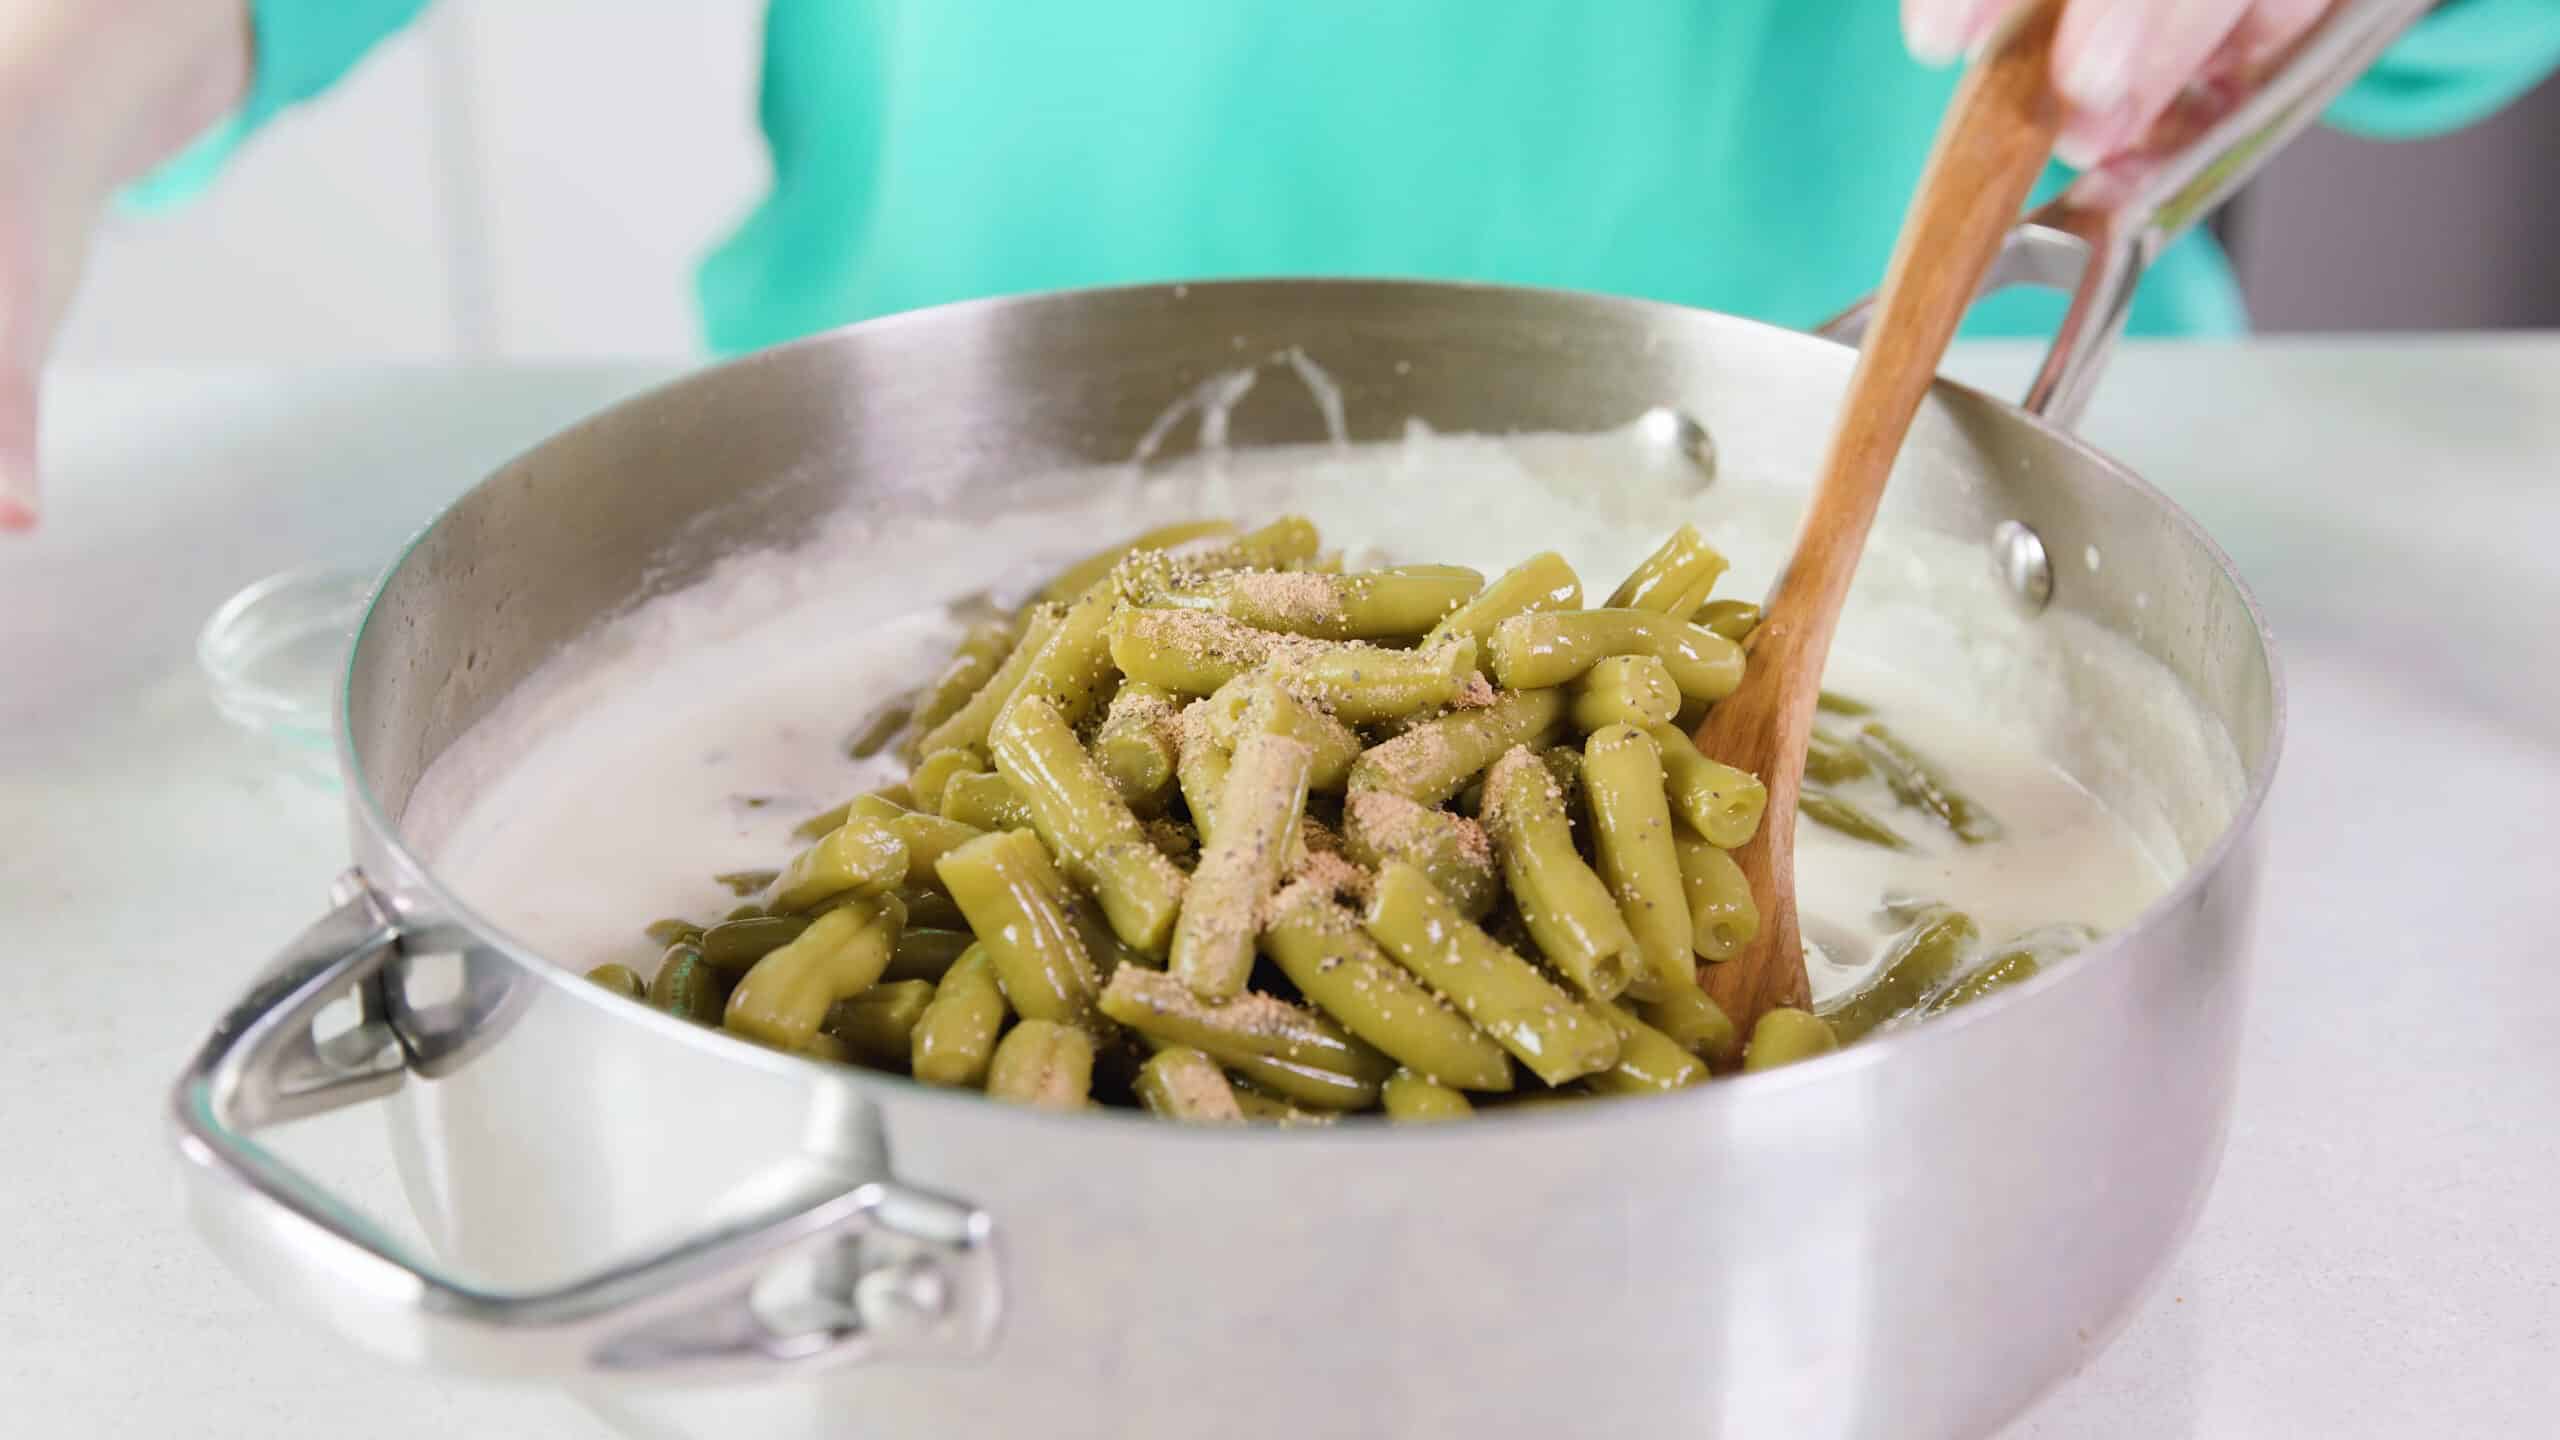 Angled view of high-rim stainless steel saucepan filled with creamy sauce and added green beans cover in various spices and a wooden spoon ready to mix.